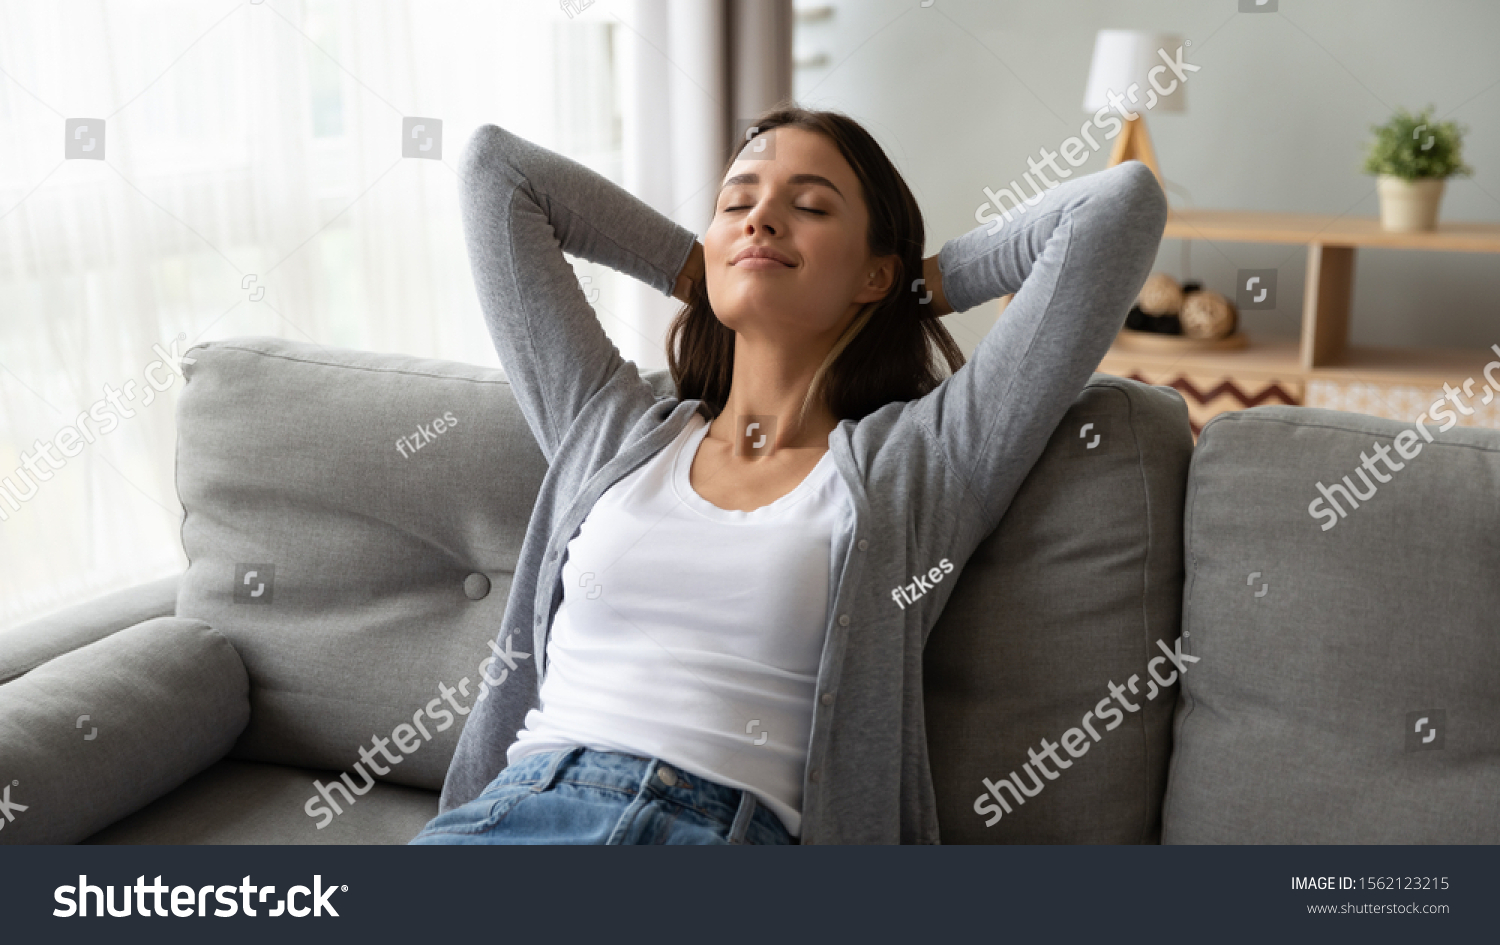 Relaxed serene pretty young woman feel fatigue lounge on comfortable sofa hands behind head rest at home, happy calm lady dream enjoy wellbeing breathing fresh air in cozy home modern living room #1562123215